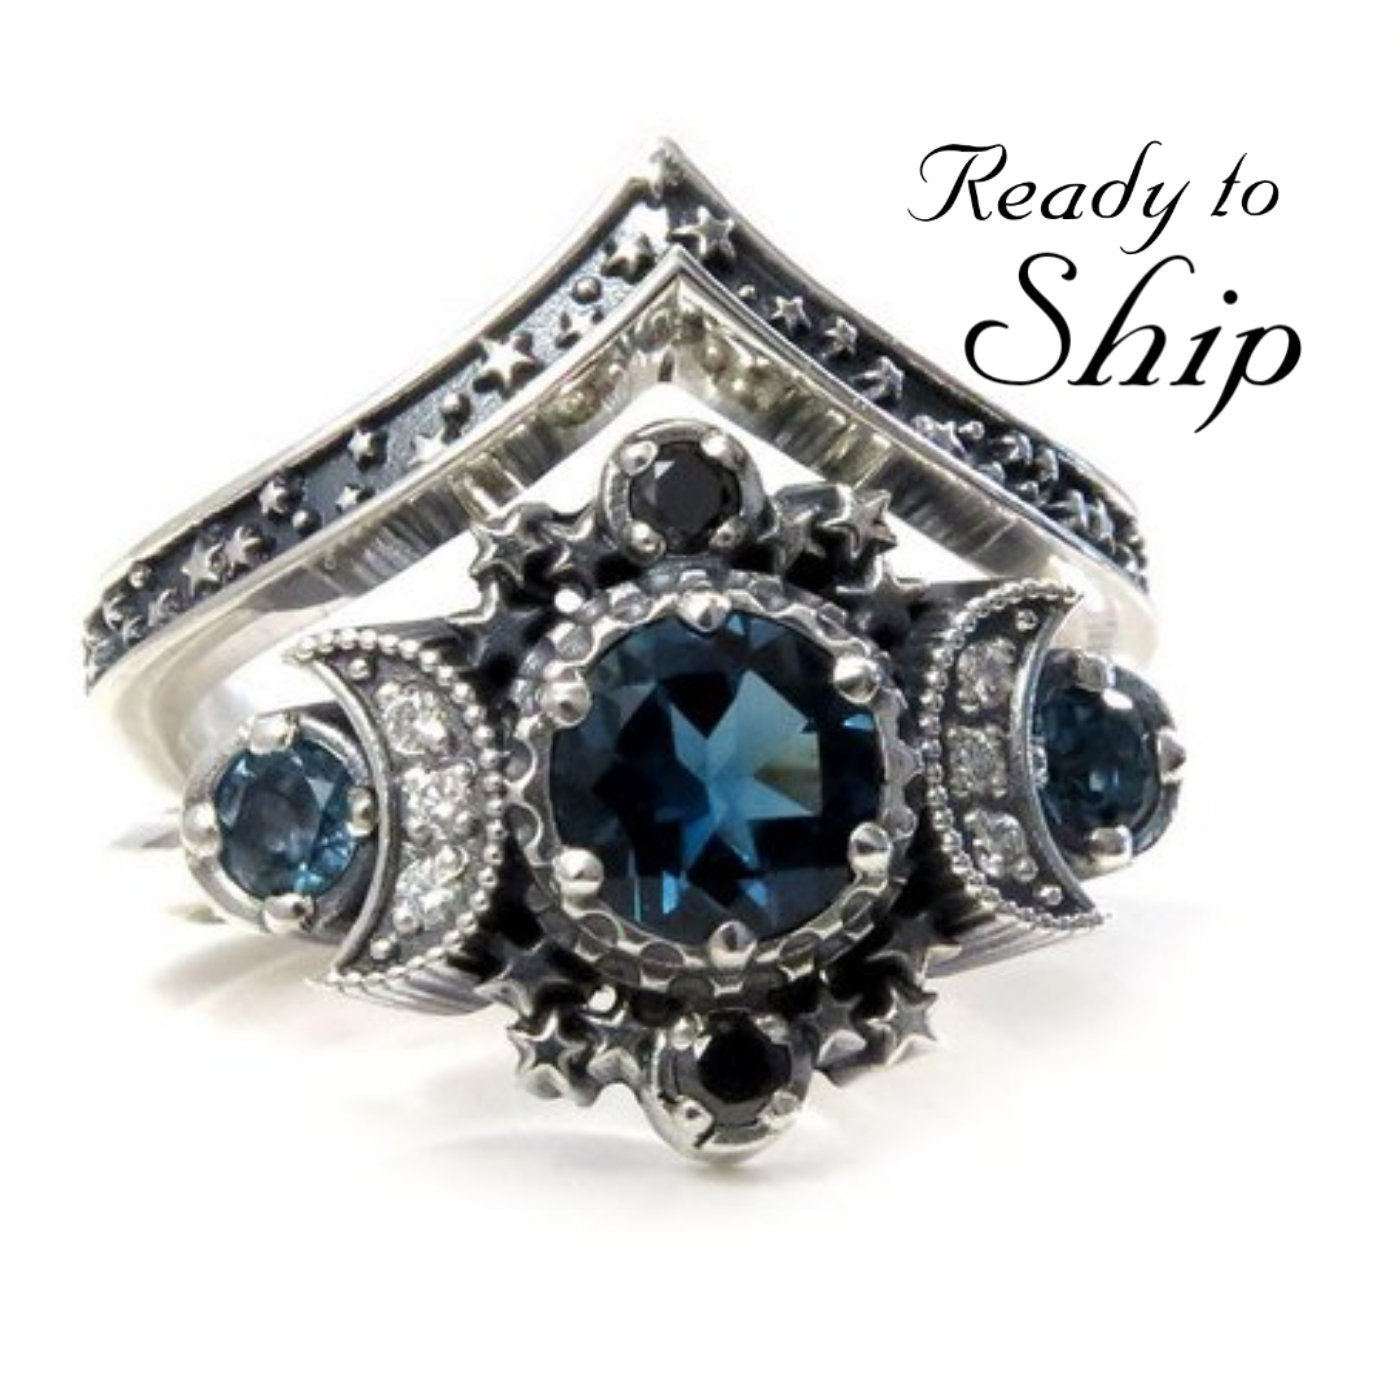 Ready to Ship Size 6 - 8 - London Blue Topaz Cosmos Moon Engagement Ring Set Triple Moon Goddess Silver Ring with Stardust Chevron Band